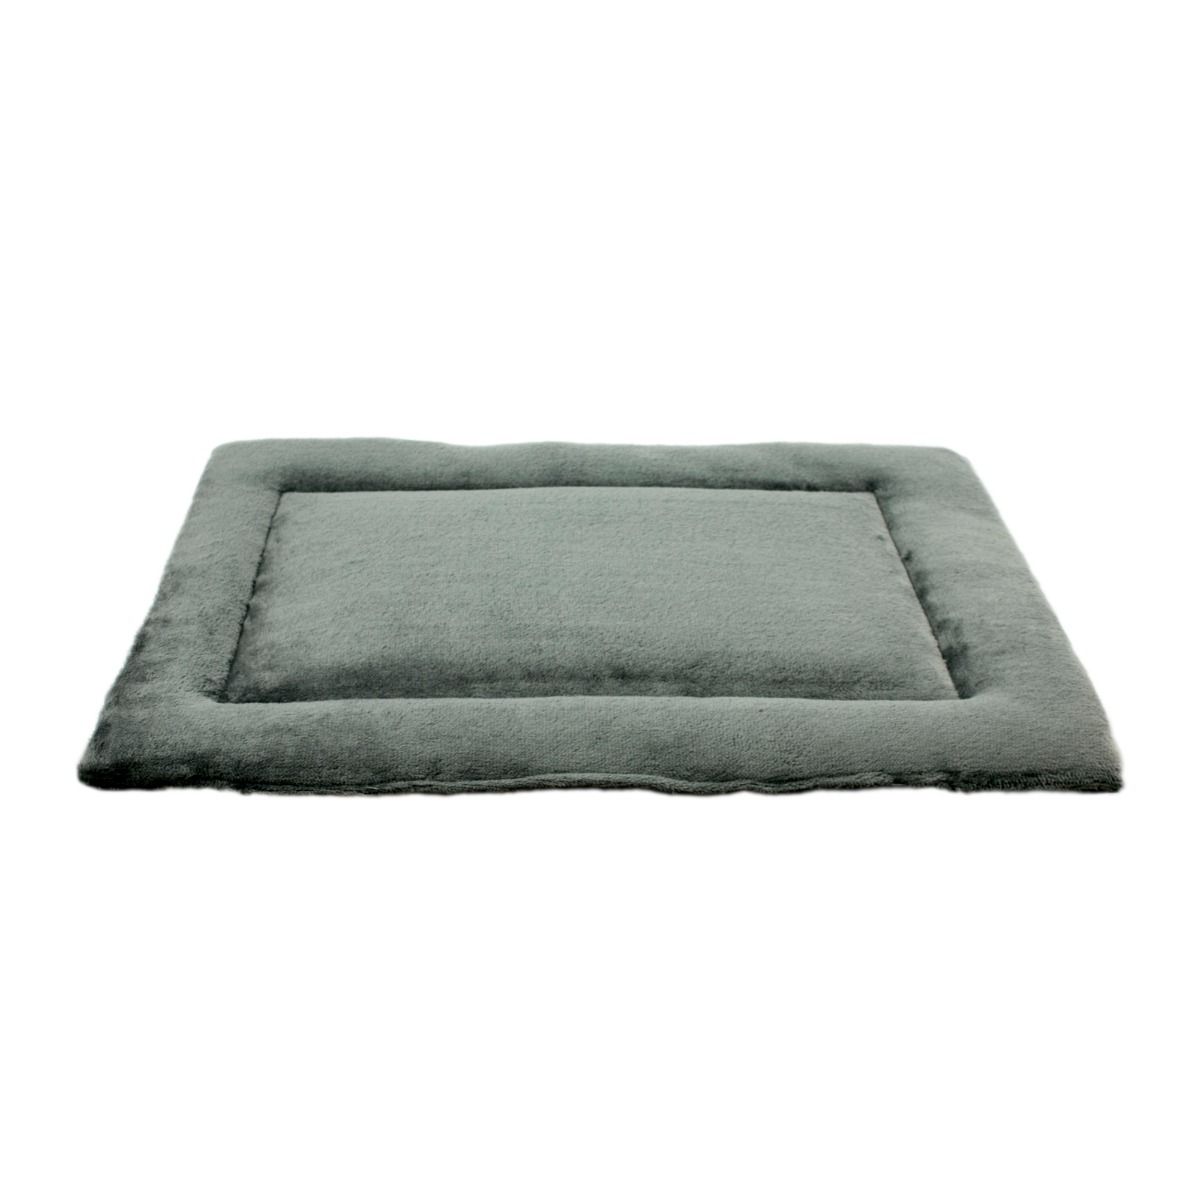 Tall Tails Dreamchaser Classic Crate Mat Dog Bed, Gray